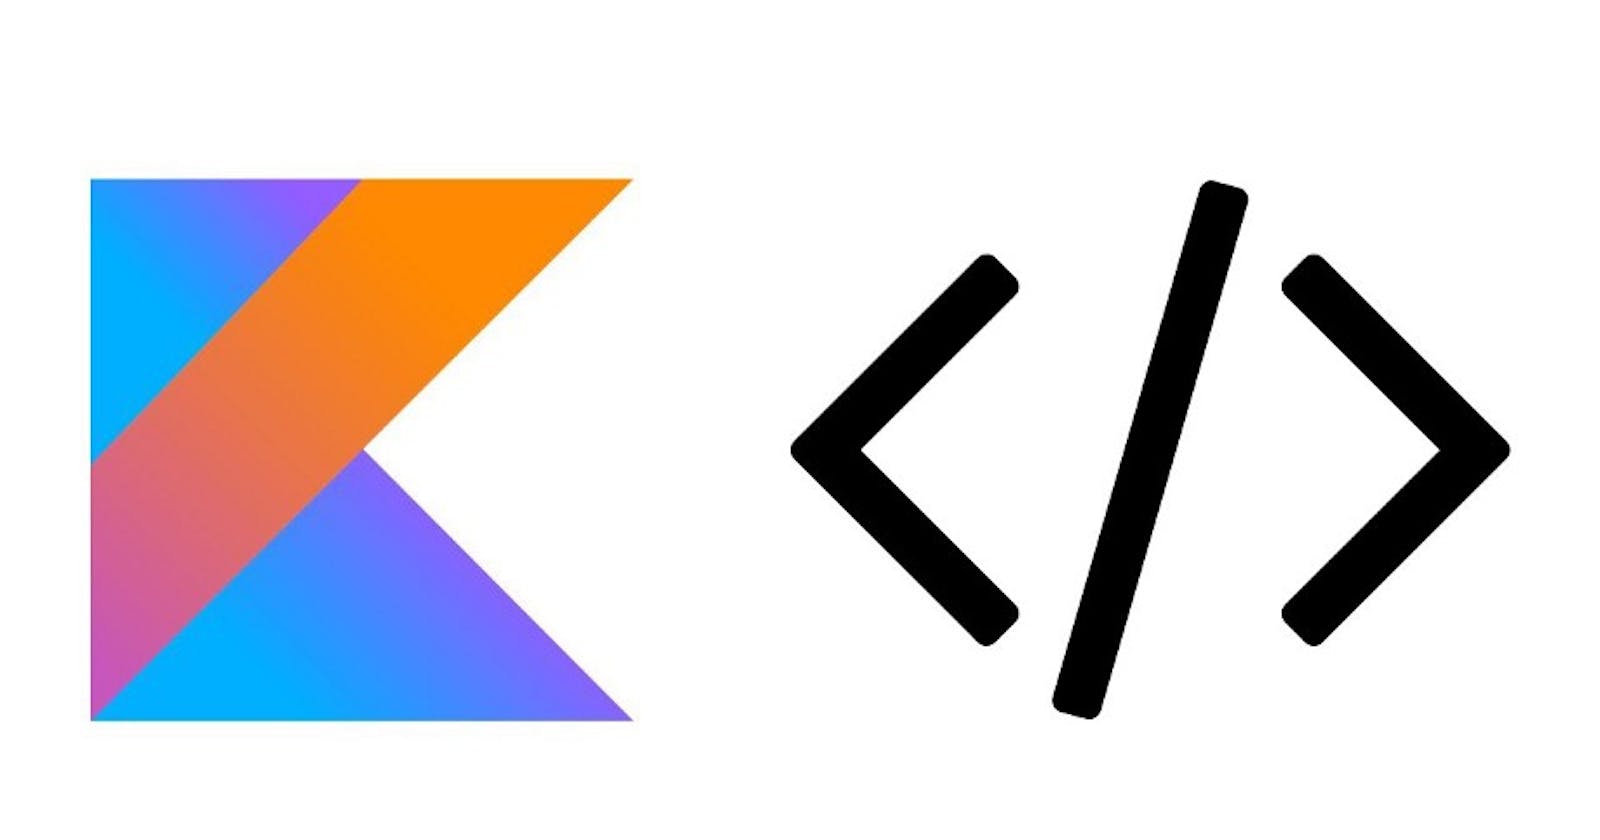 Settling the Async-Await v withContext debate in Kotlin Coroutines